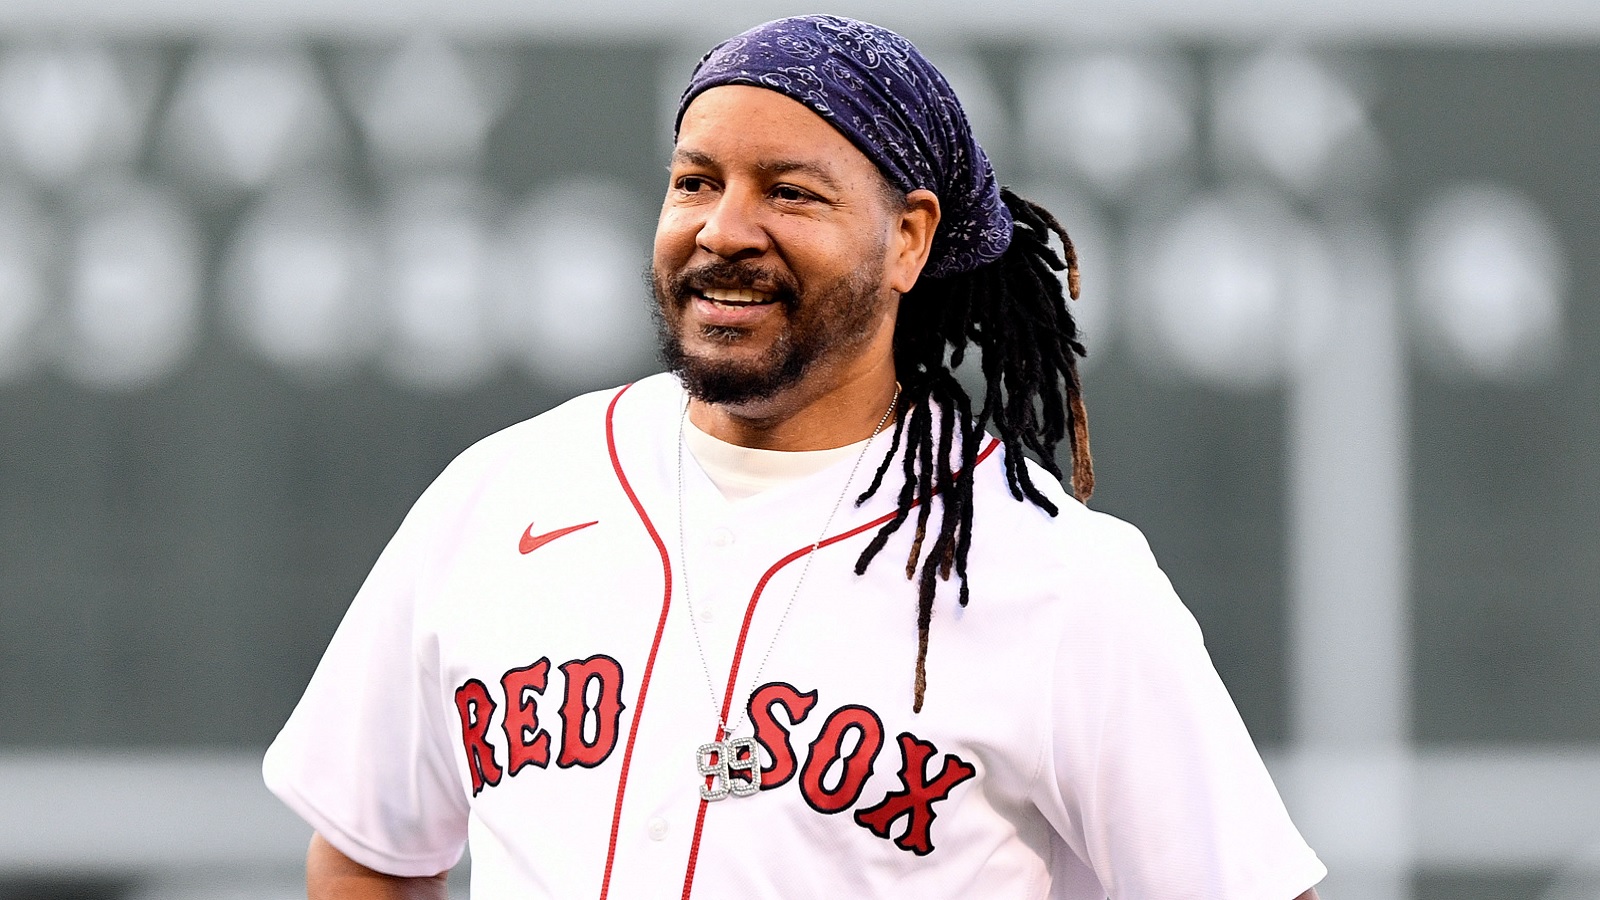 Manny Ramirez in a Red Sox jersey